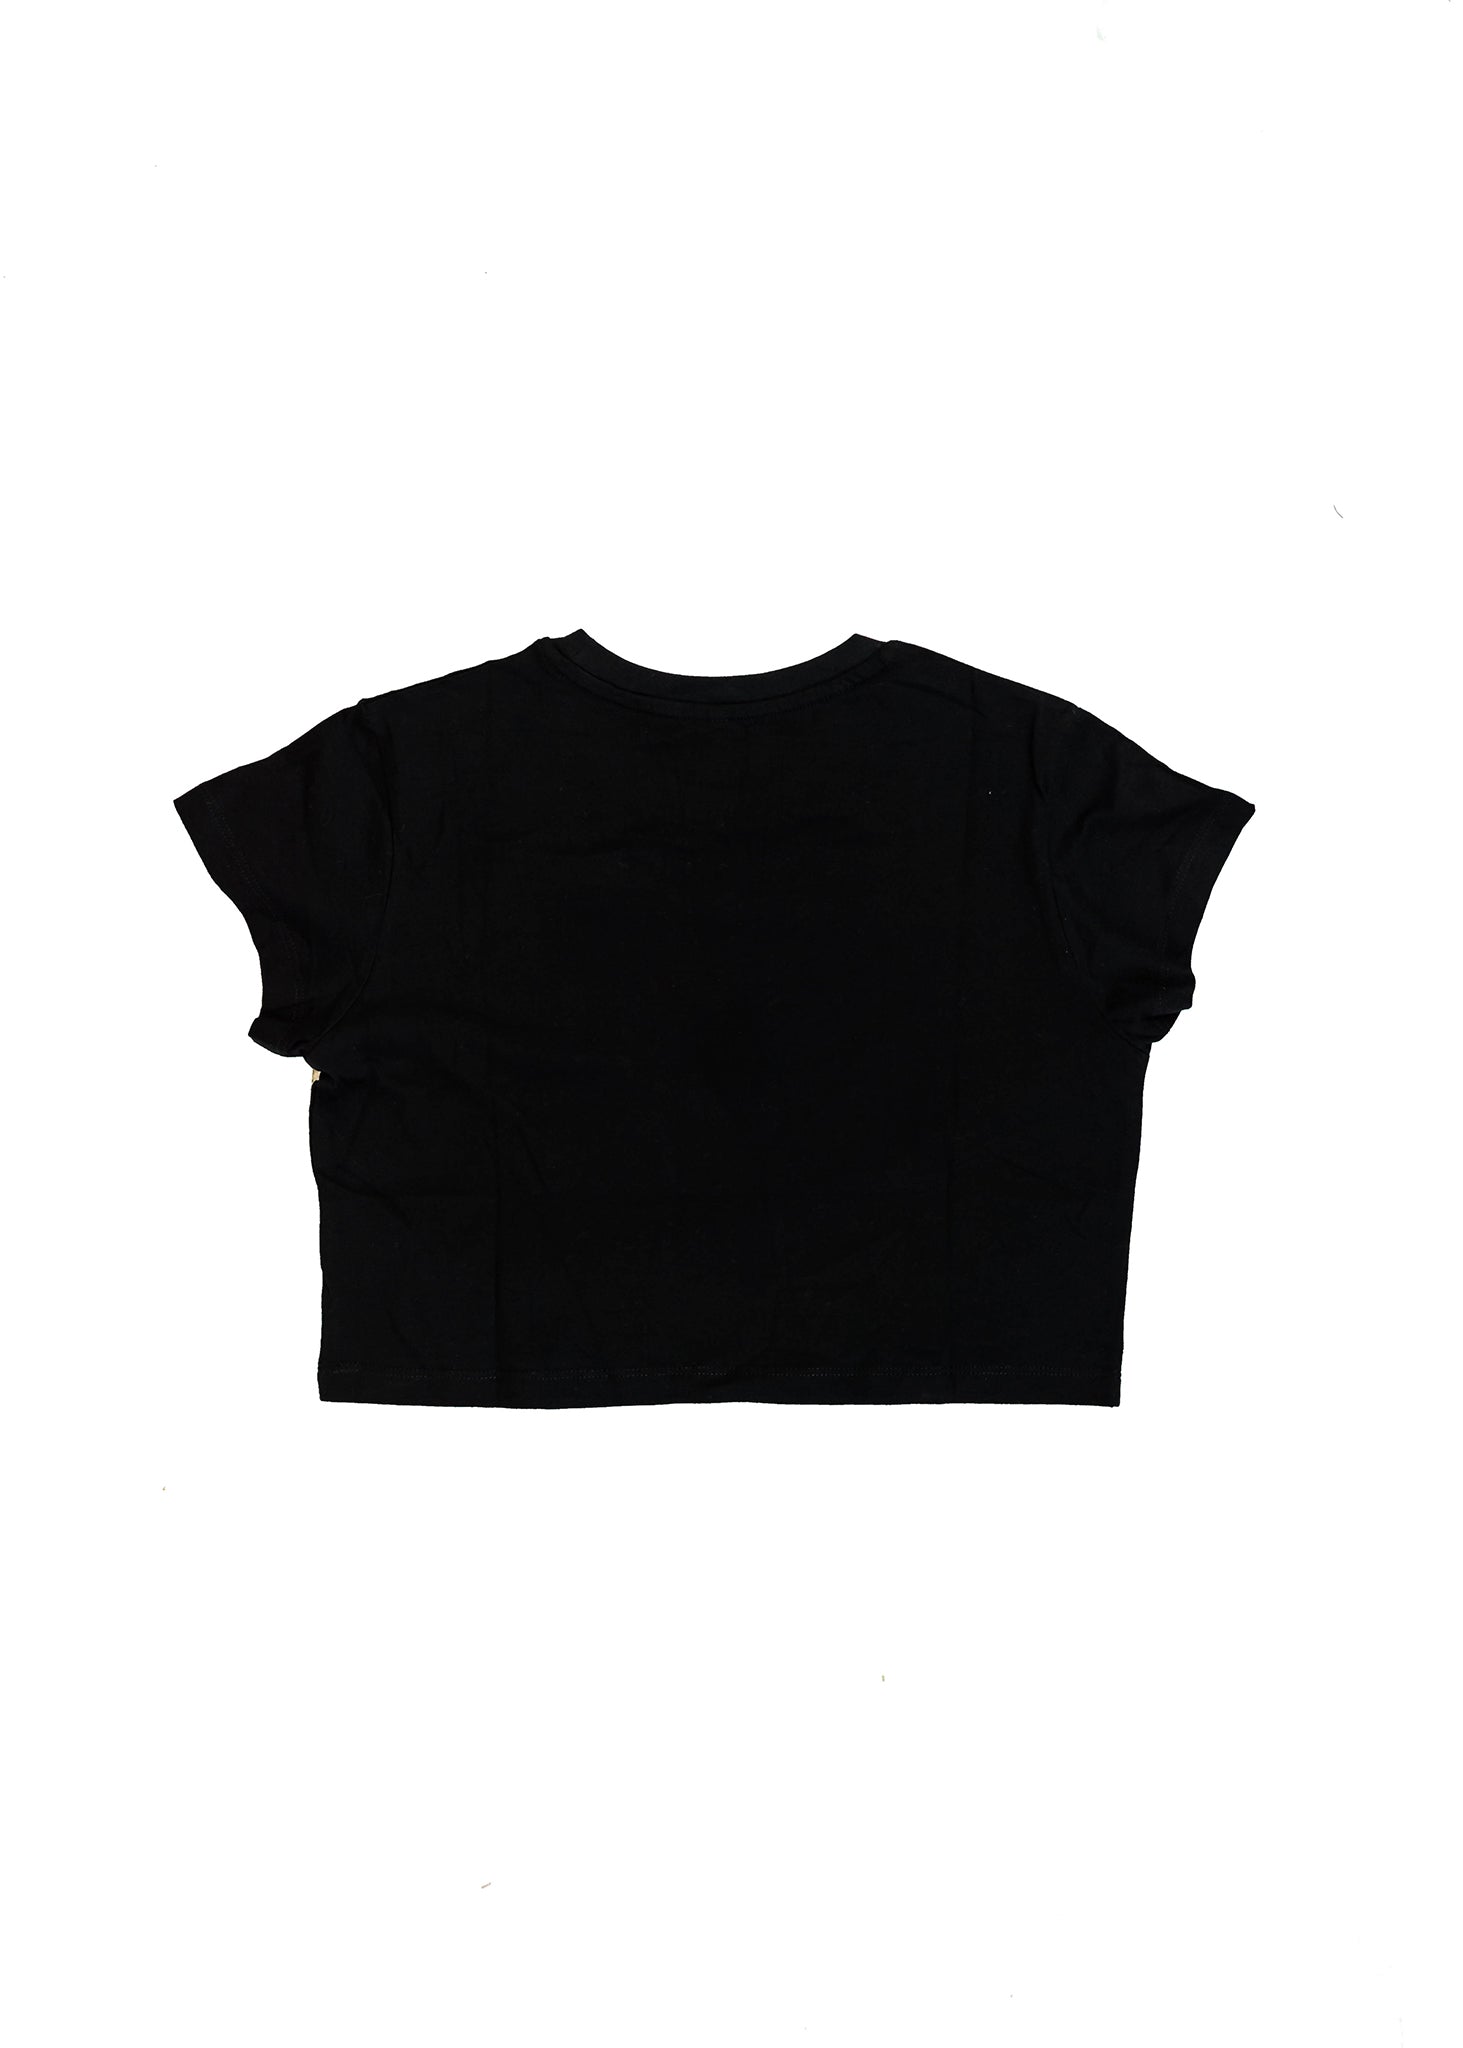 A black women's high quality cropped t-shirt. Full size view of the back side of a black cropped shirt with an embroidered R13 1974 911 RSR Turbo. Fabric composition of this tee is 100% cotton. The material is very soft, stretchy, and non-transparent. The style of this tshirt is a crewneck, short sleeve, cropped at the waist, with embroidery on the left chest.